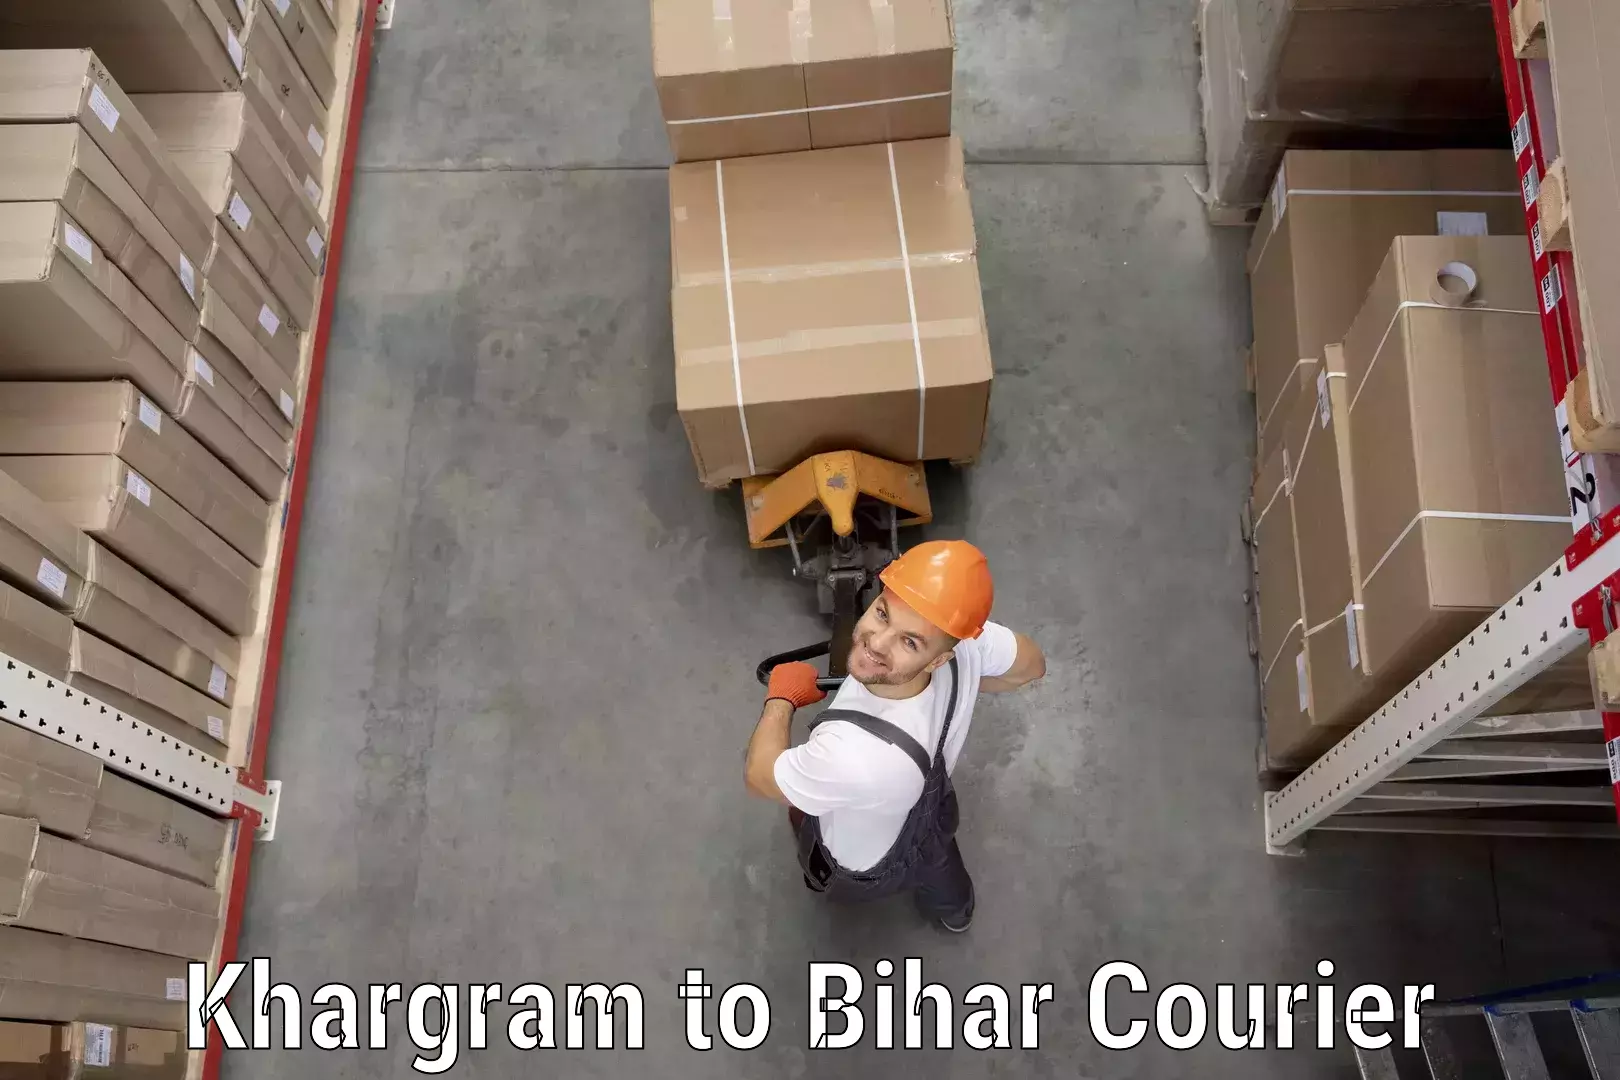 Global courier networks Khargram to Birpur